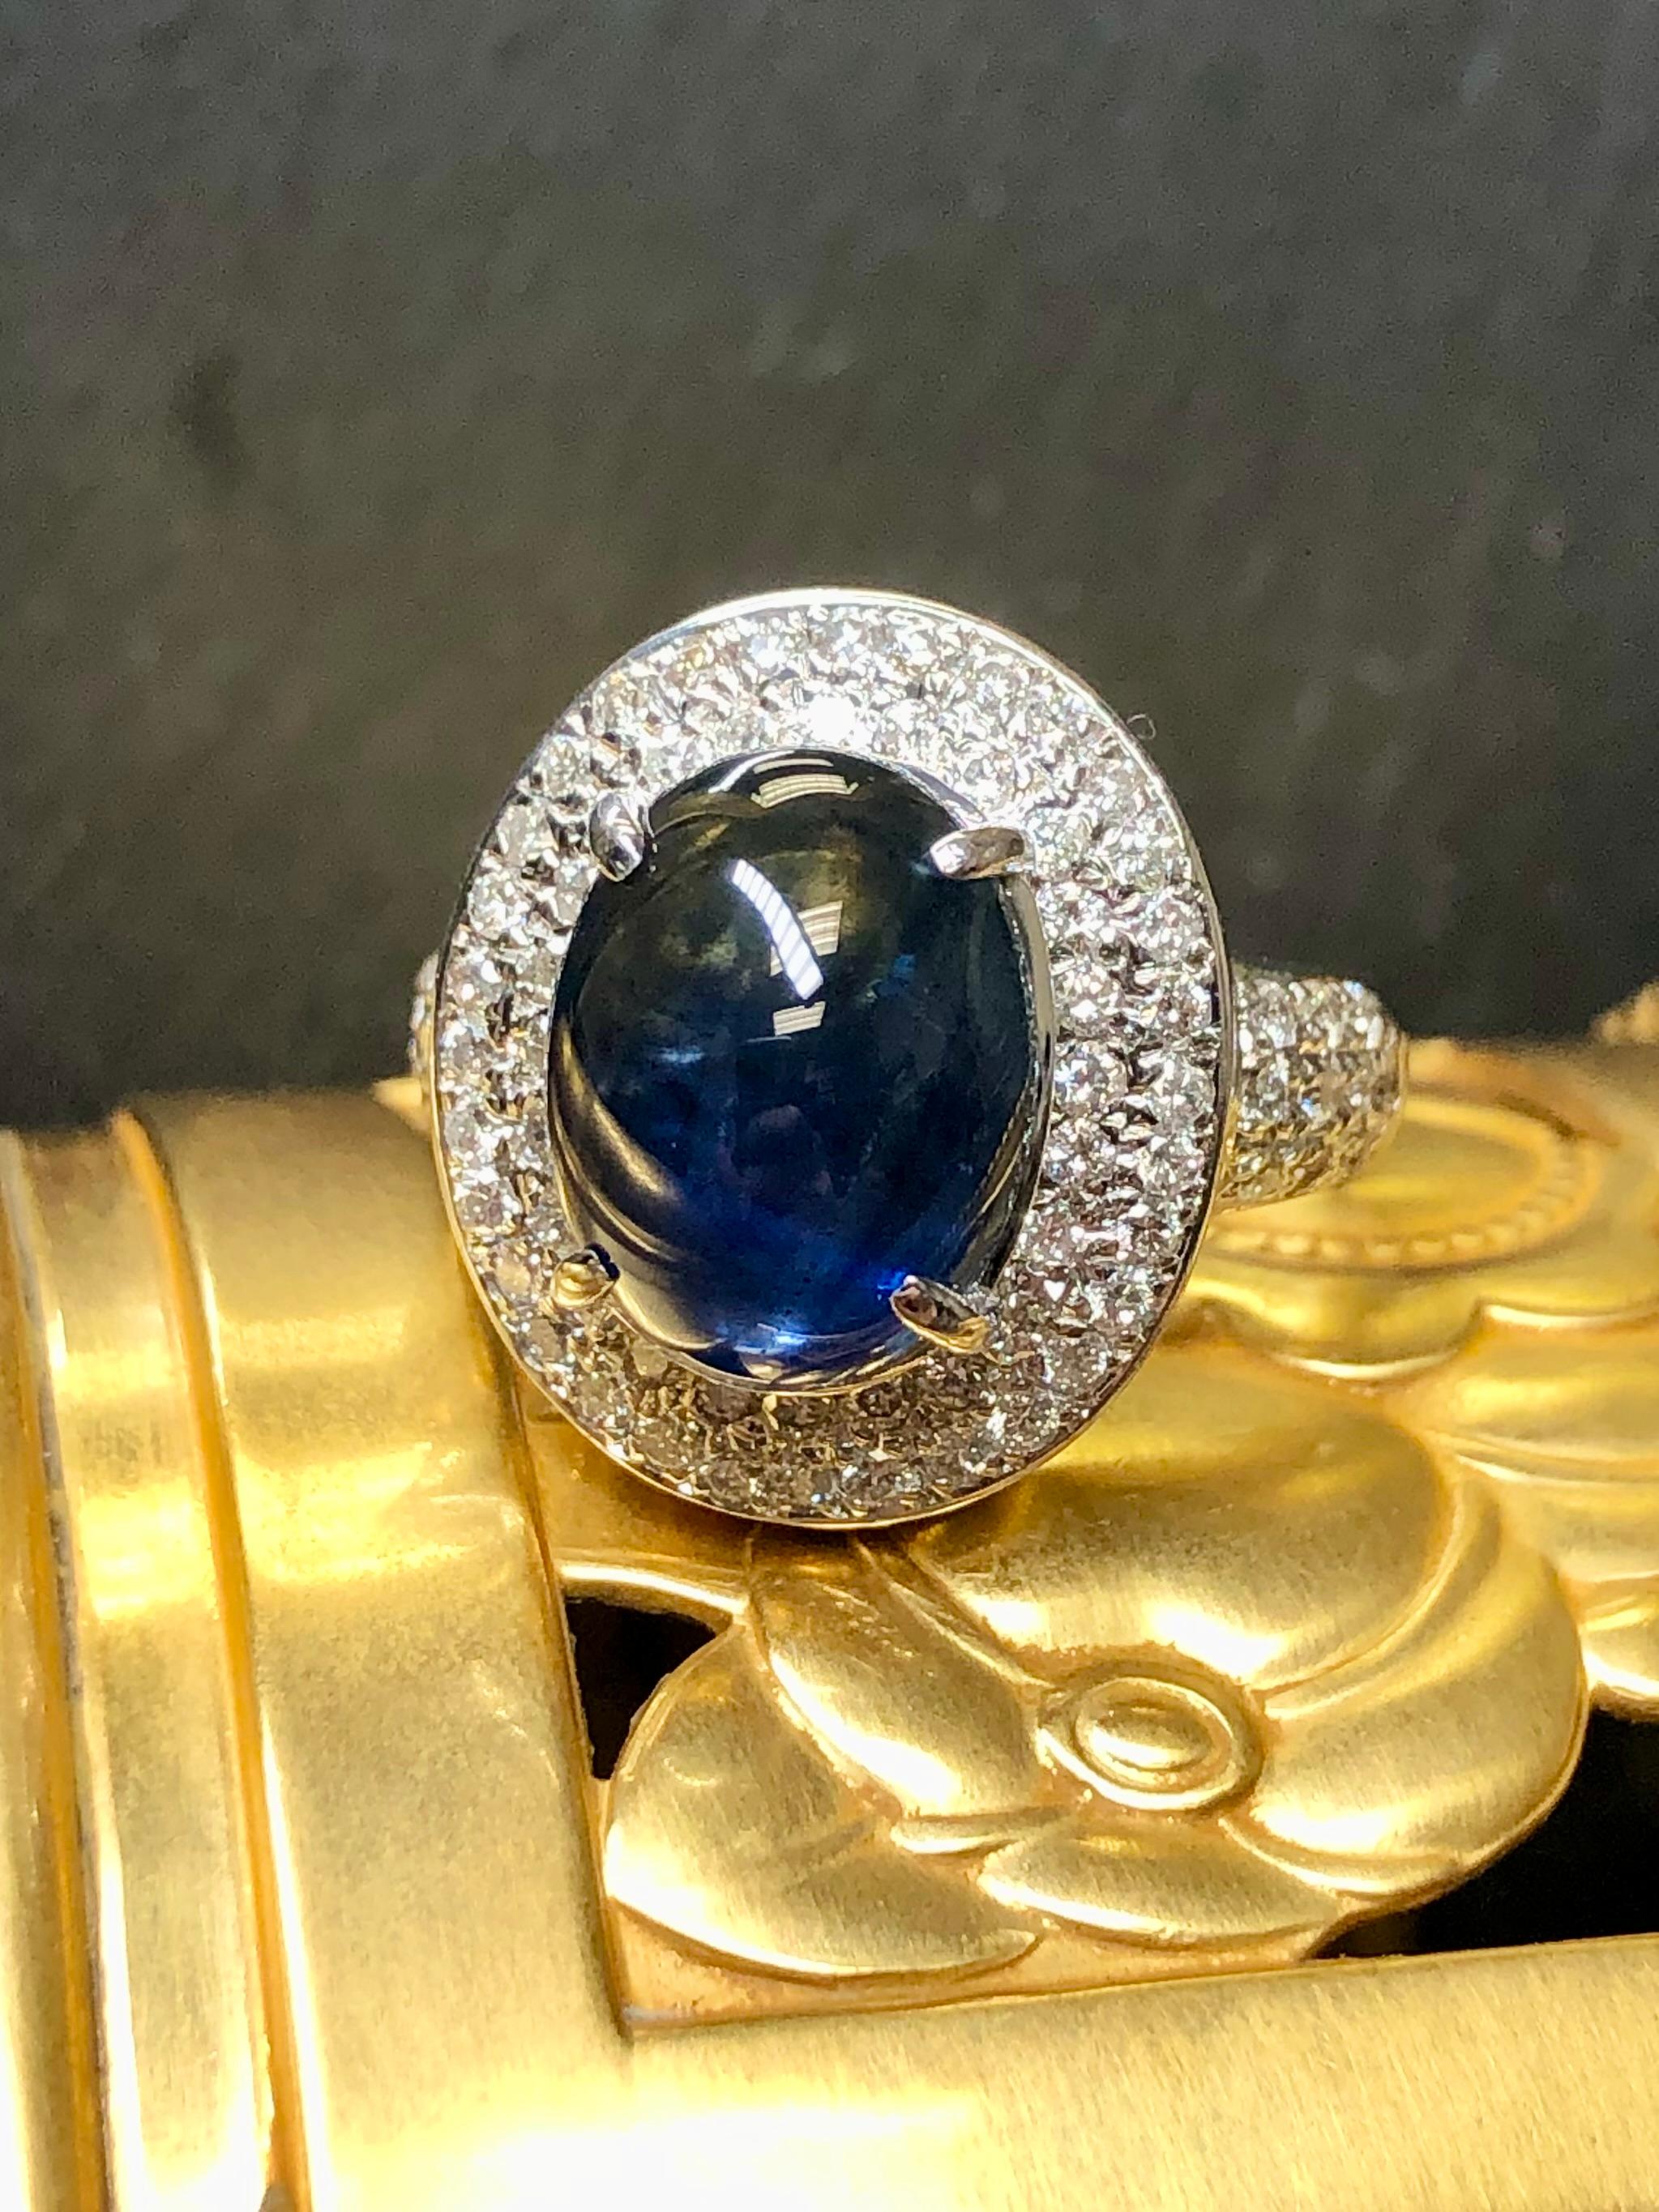 
A beautiful and impressive ring done in 14K white gold and centered with an approximately 8.36ct (12.92 9.95x6.05) cabochon sapphire exhibiting a desirable soft, deep blue color. Surrounding the center stone is approximately 1.56cttw in I-J Vs1-2